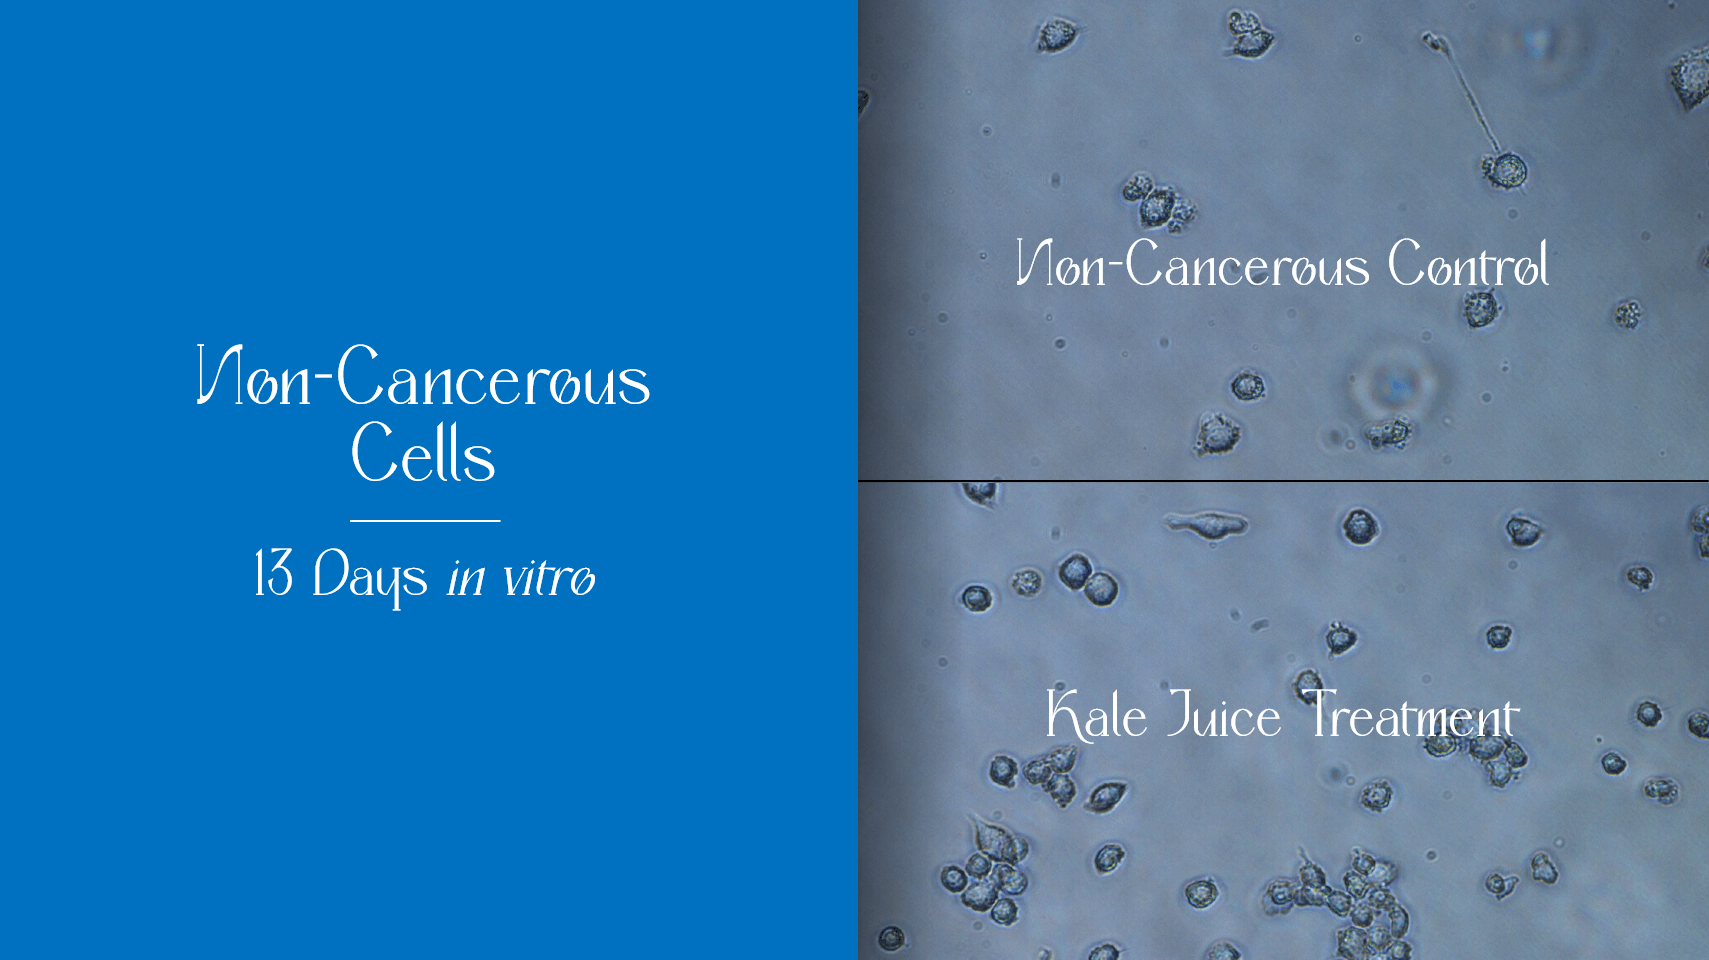  PowerPoint slide from Bilal Qizilbash's 2021 VQuad presentation illustrating a comparison of the impact of curly kale juice on non-cancerous cells after 13 days in vitro.